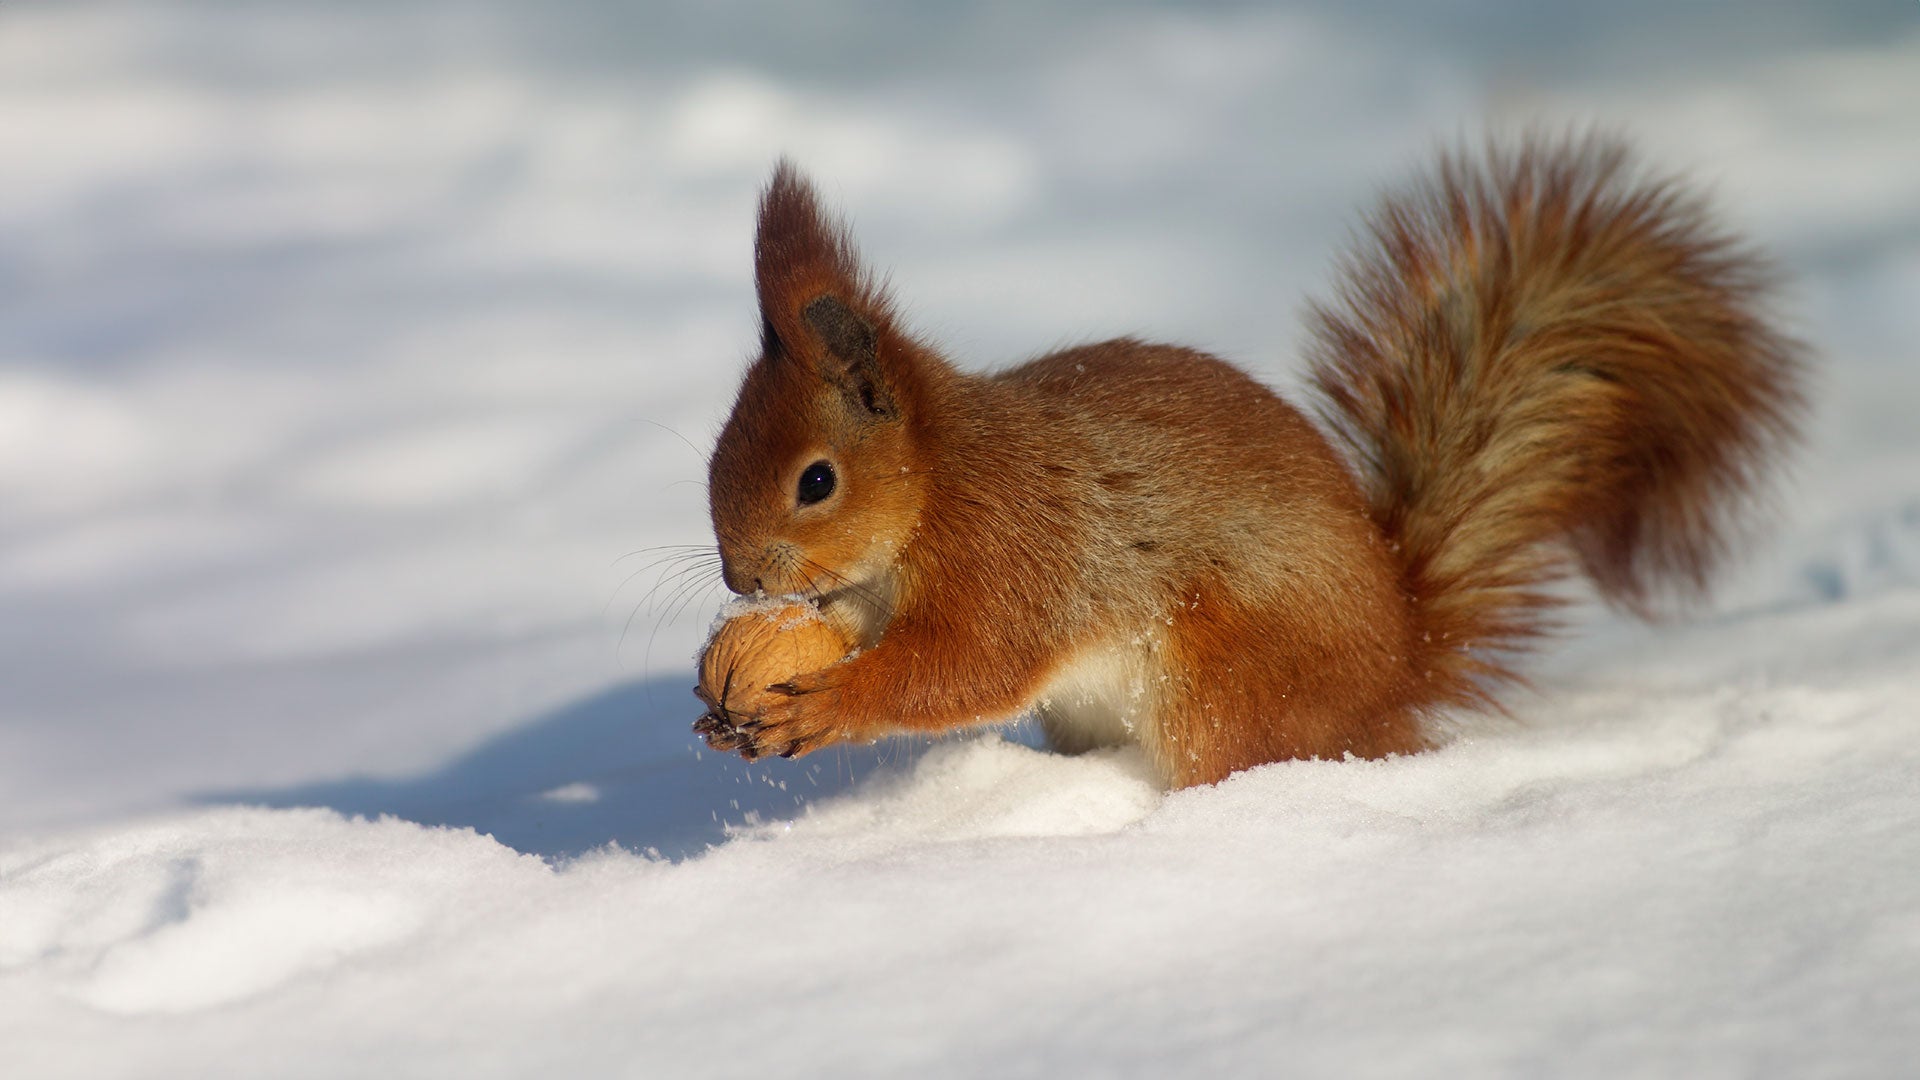 Red squirrel in snow with a walnut